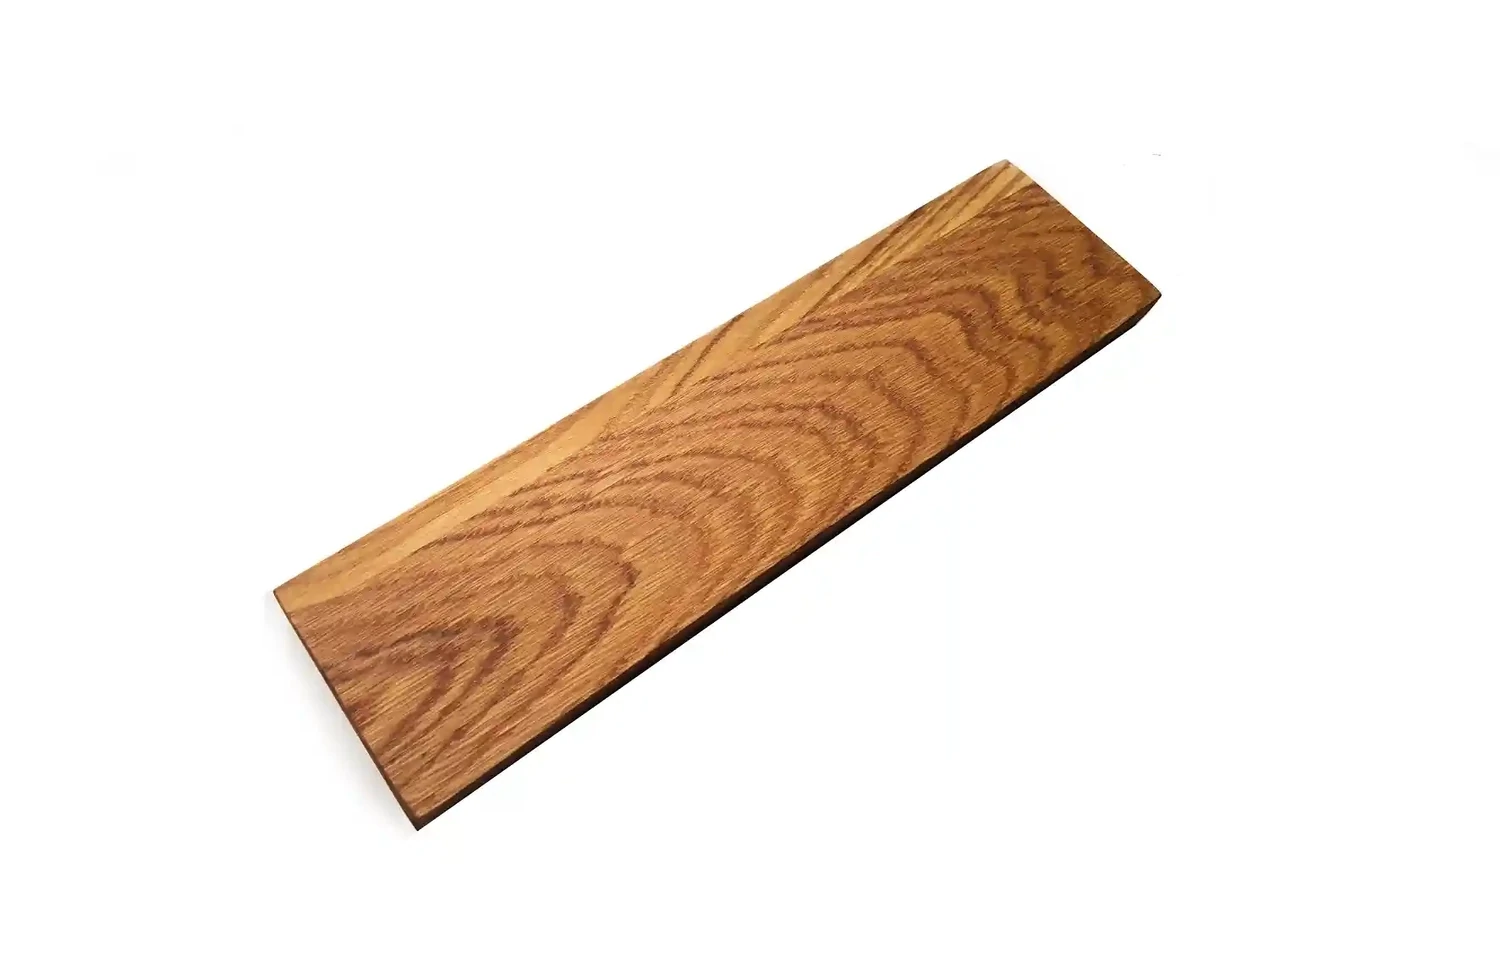 Ergonomic Wooden Wrist Rest for 60% Keyboards - Perfect Fit for GH60, Pok3r, Anne Pro & More